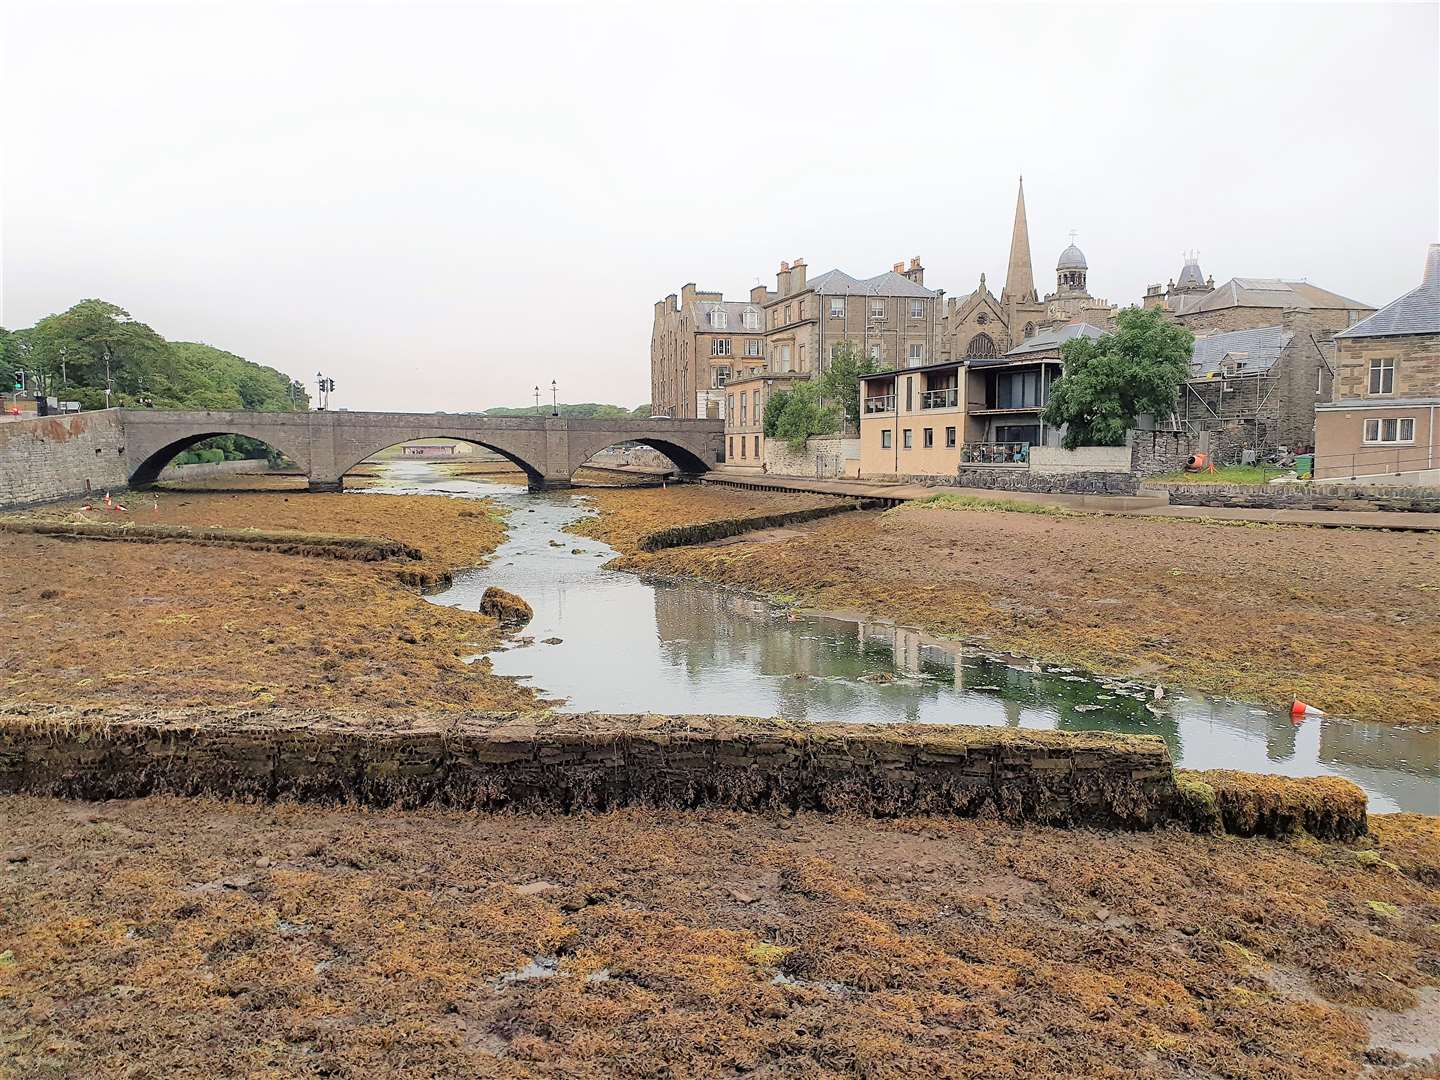 Summer 2021 was Wick's driest since 1955 and the second most dry the town has experienced since 1910. Photograph by DGS